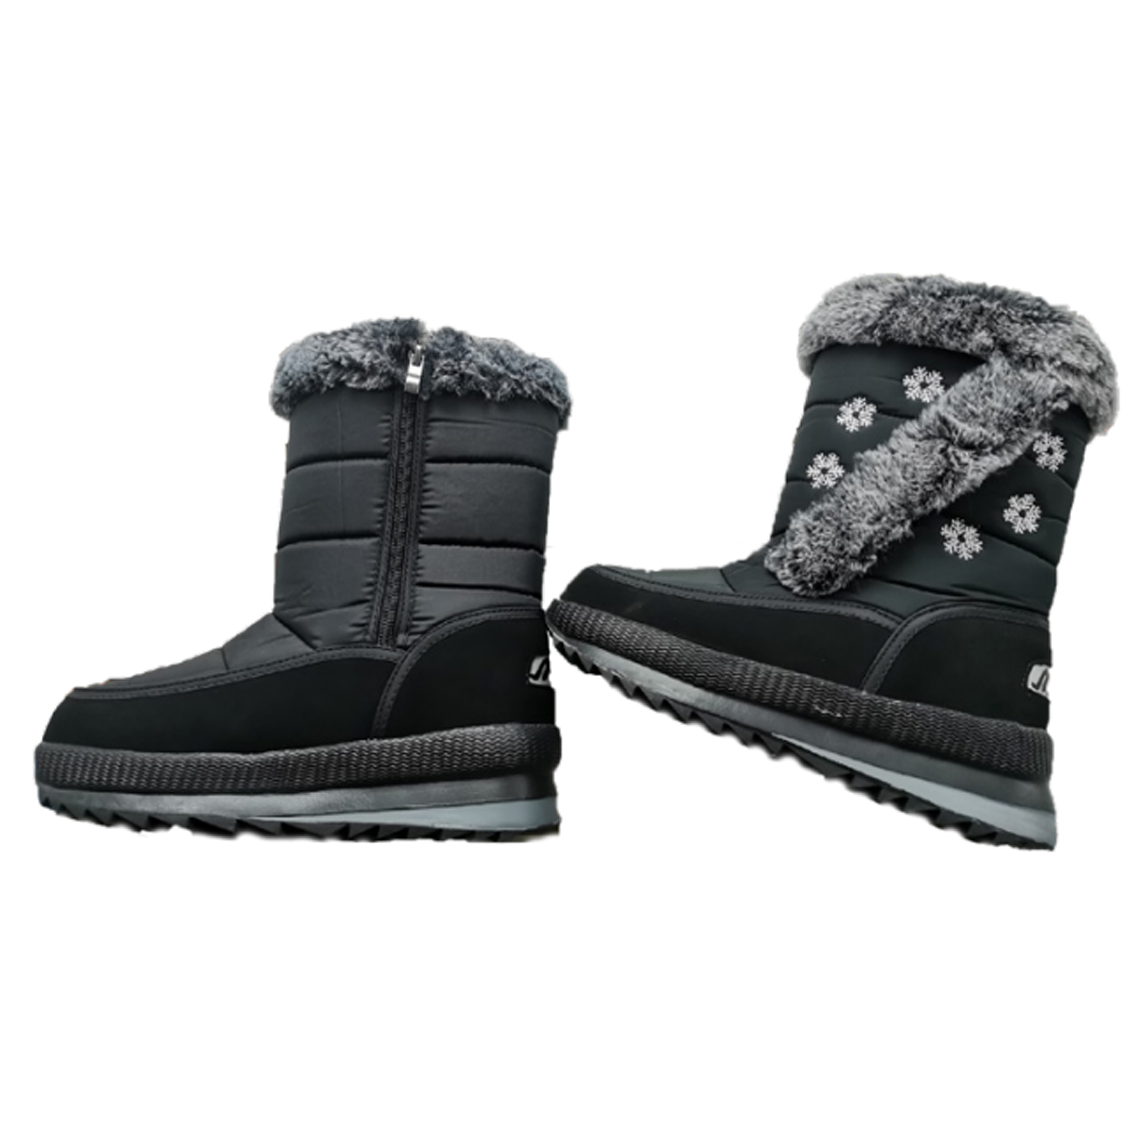 Wholesale Women's Boots Winter Style Shoes Black Emely NPE27